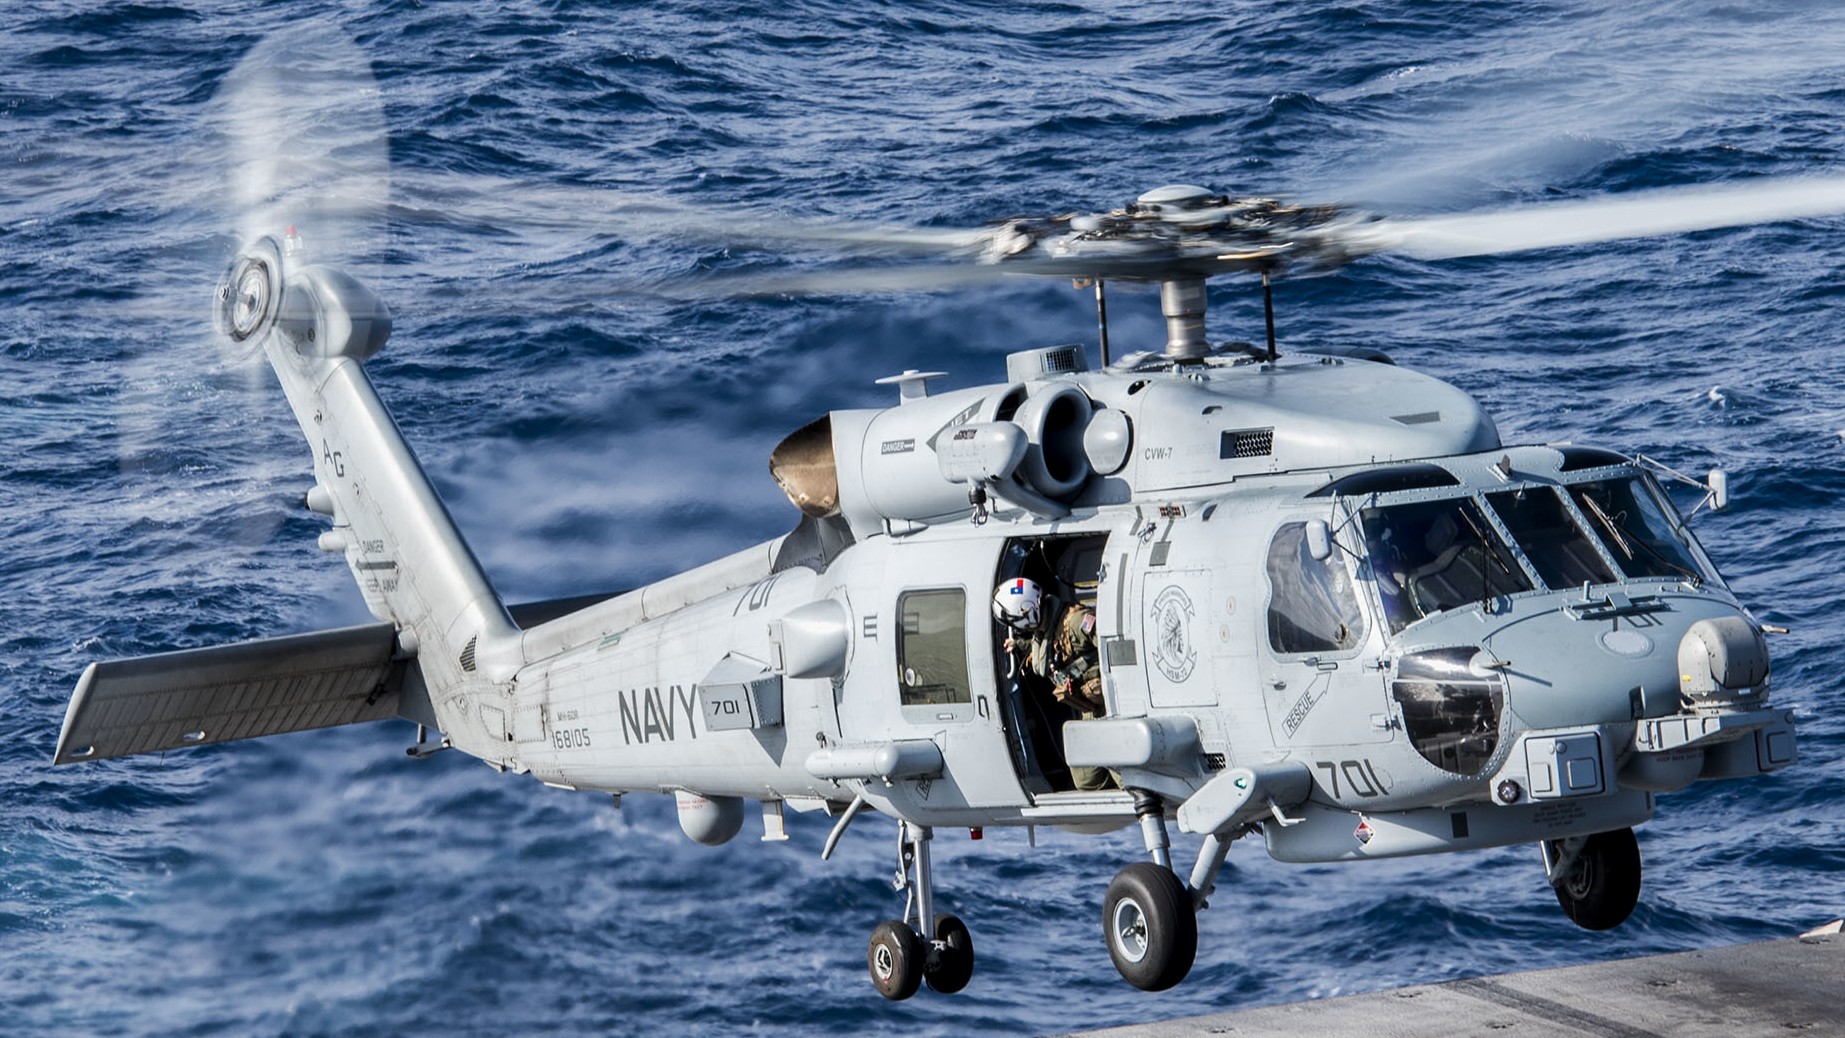 hsm-72 proud warriors helicopter maritime strike squadron us navy mh-60r seahawk 2015 13 carrier air wing cvw-7 uss harry s. truman cvn-75